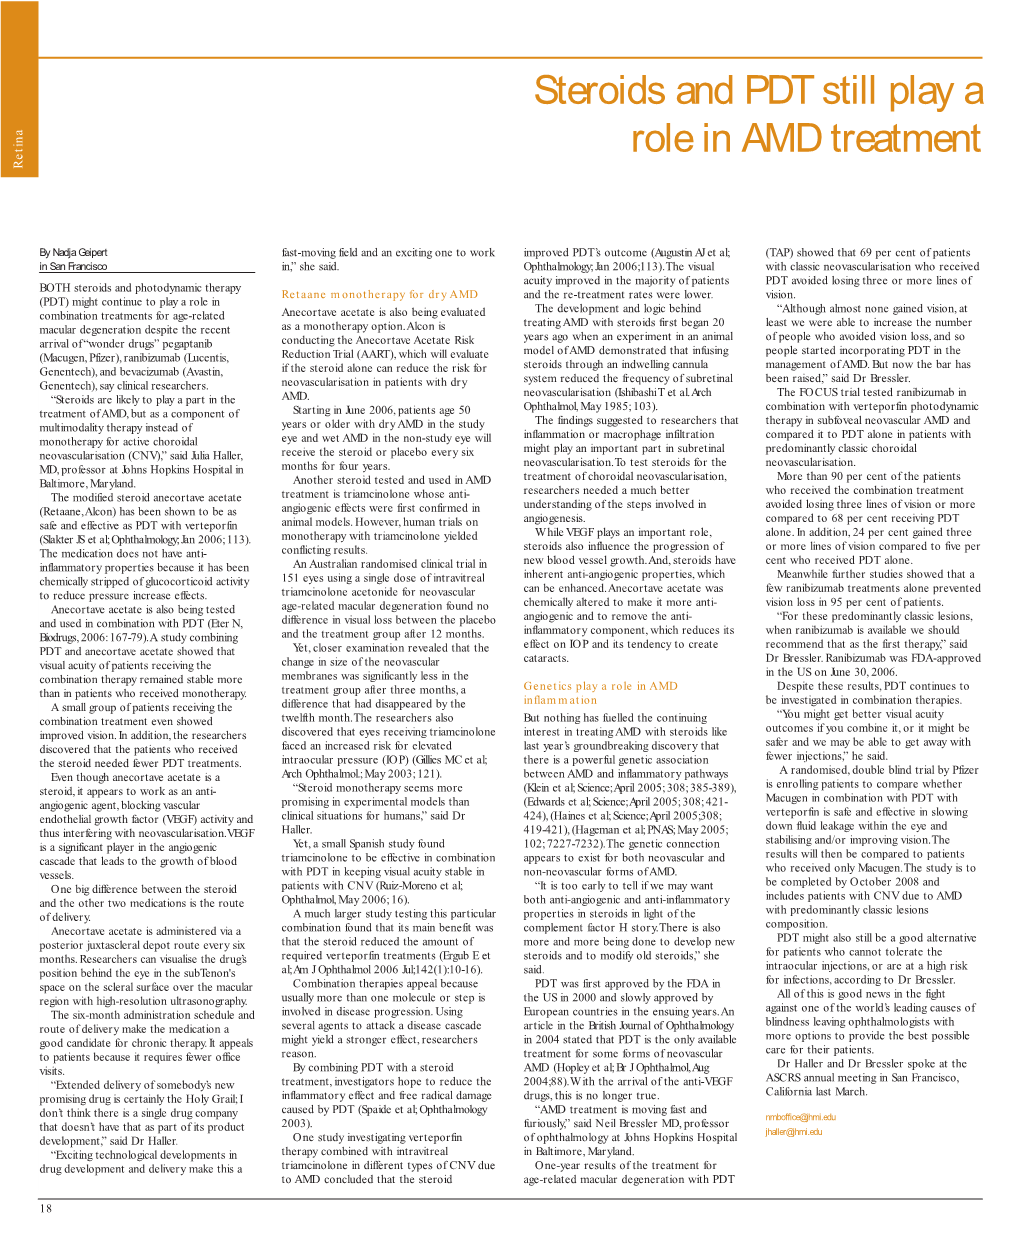 Steroids and PDT Still Play a Role in AMD Treatment Retina